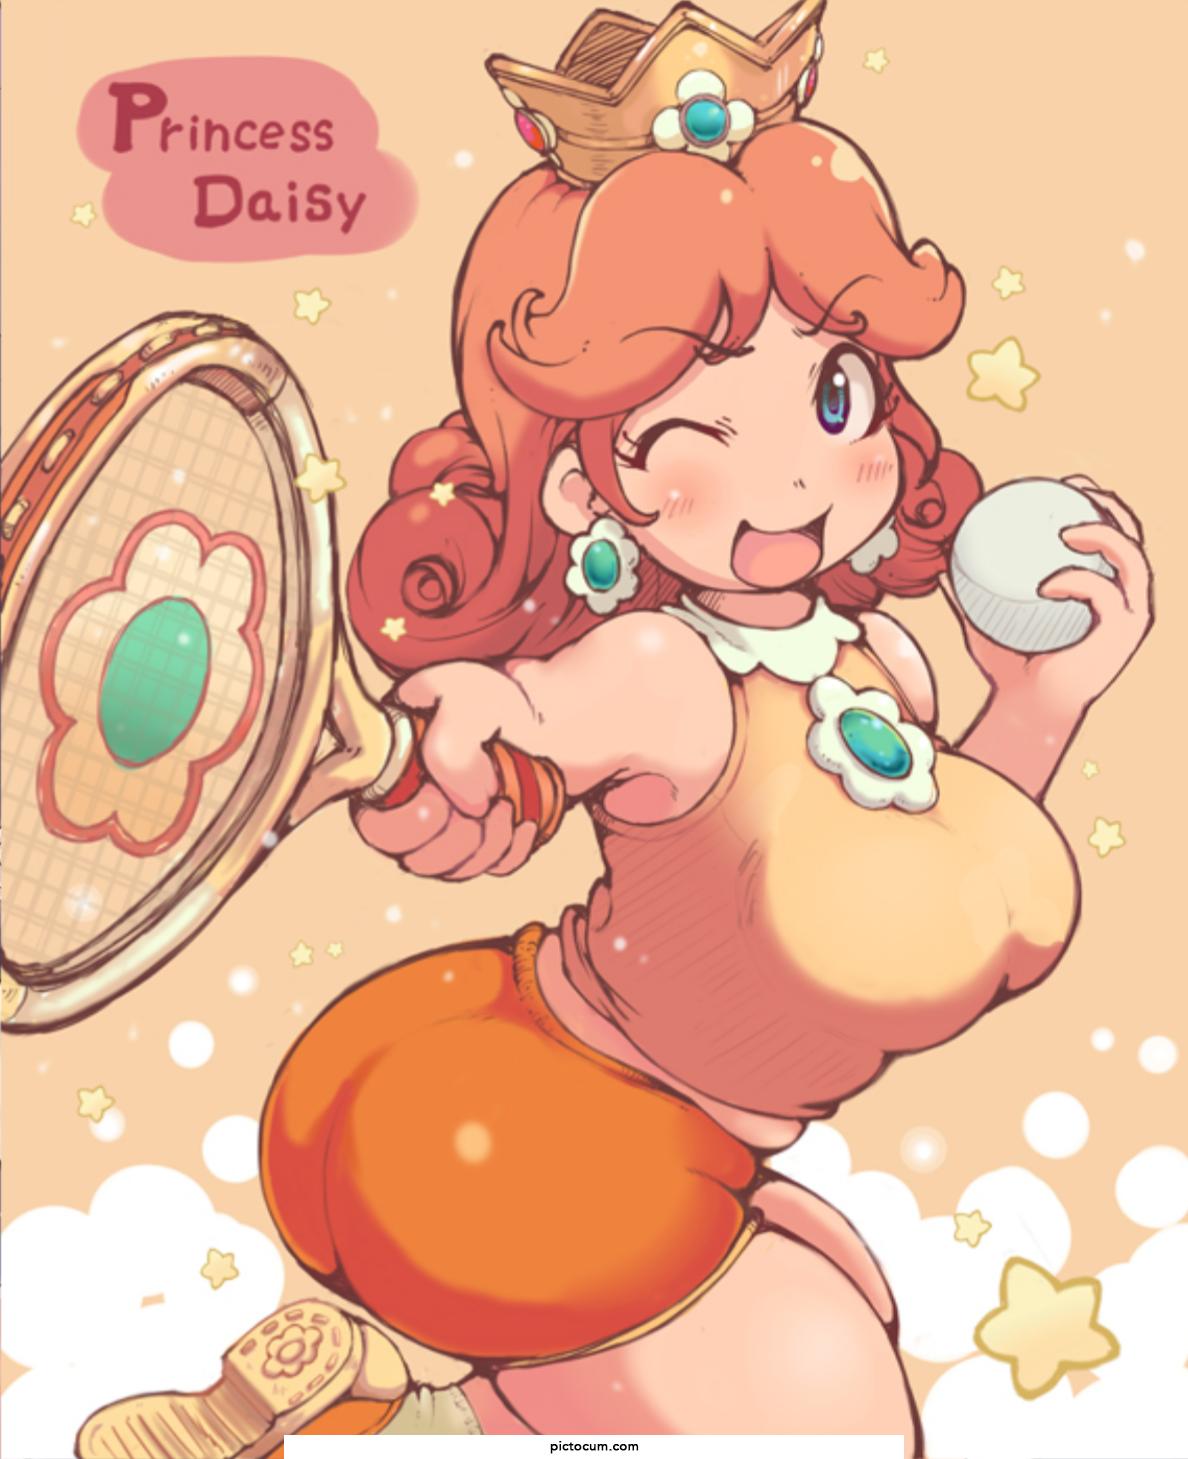 Playing as Daisy in mario tennis by